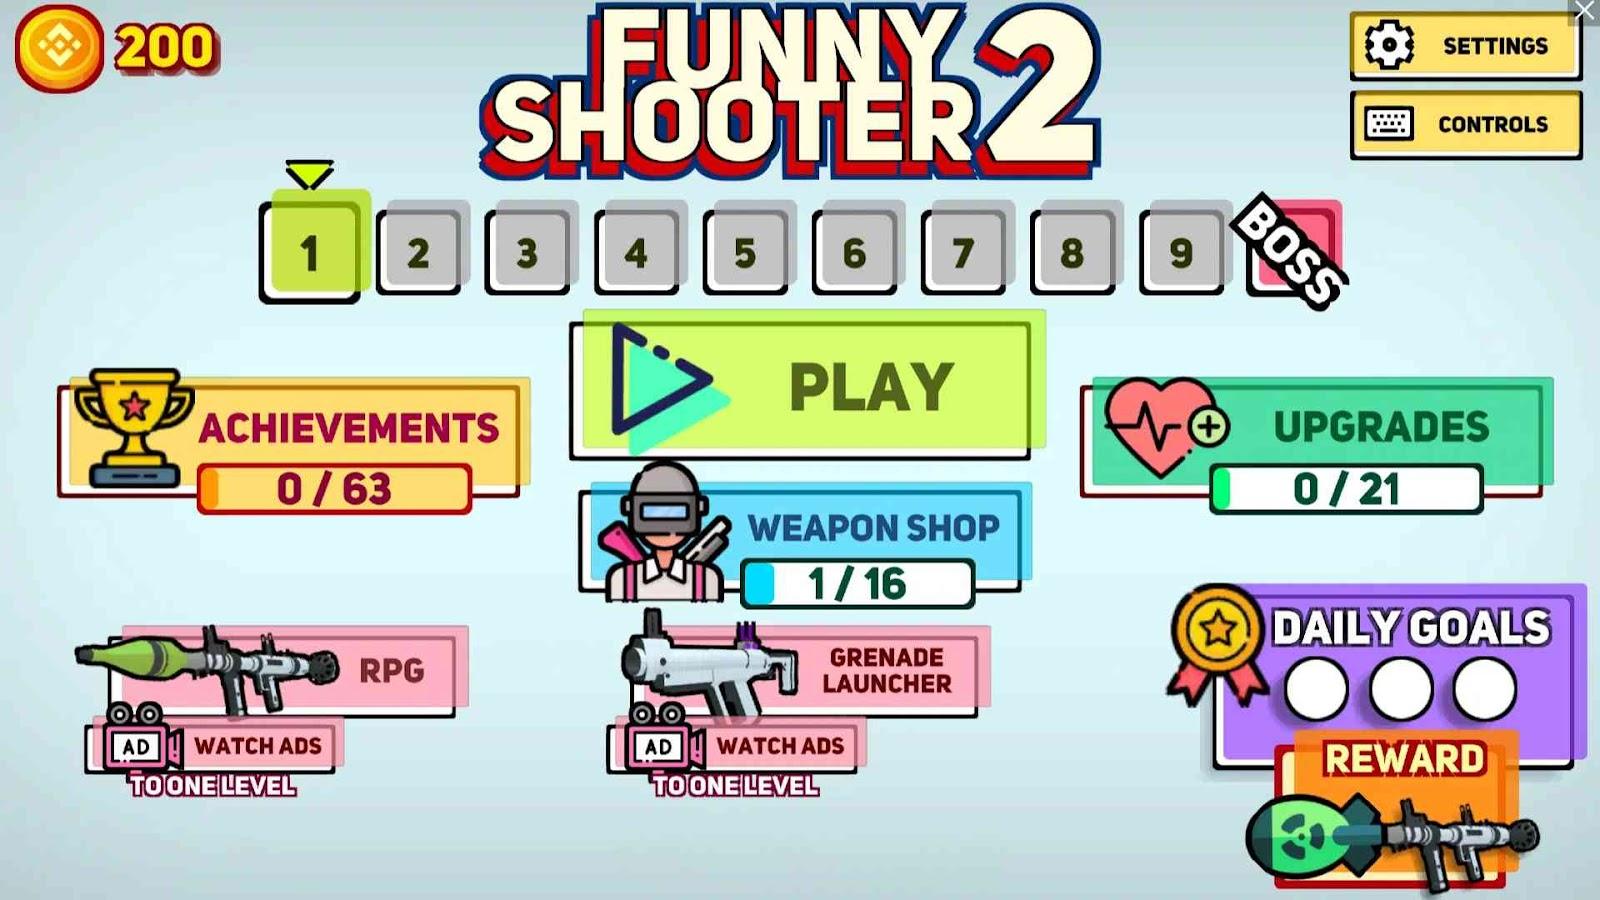 Funny shooter 2